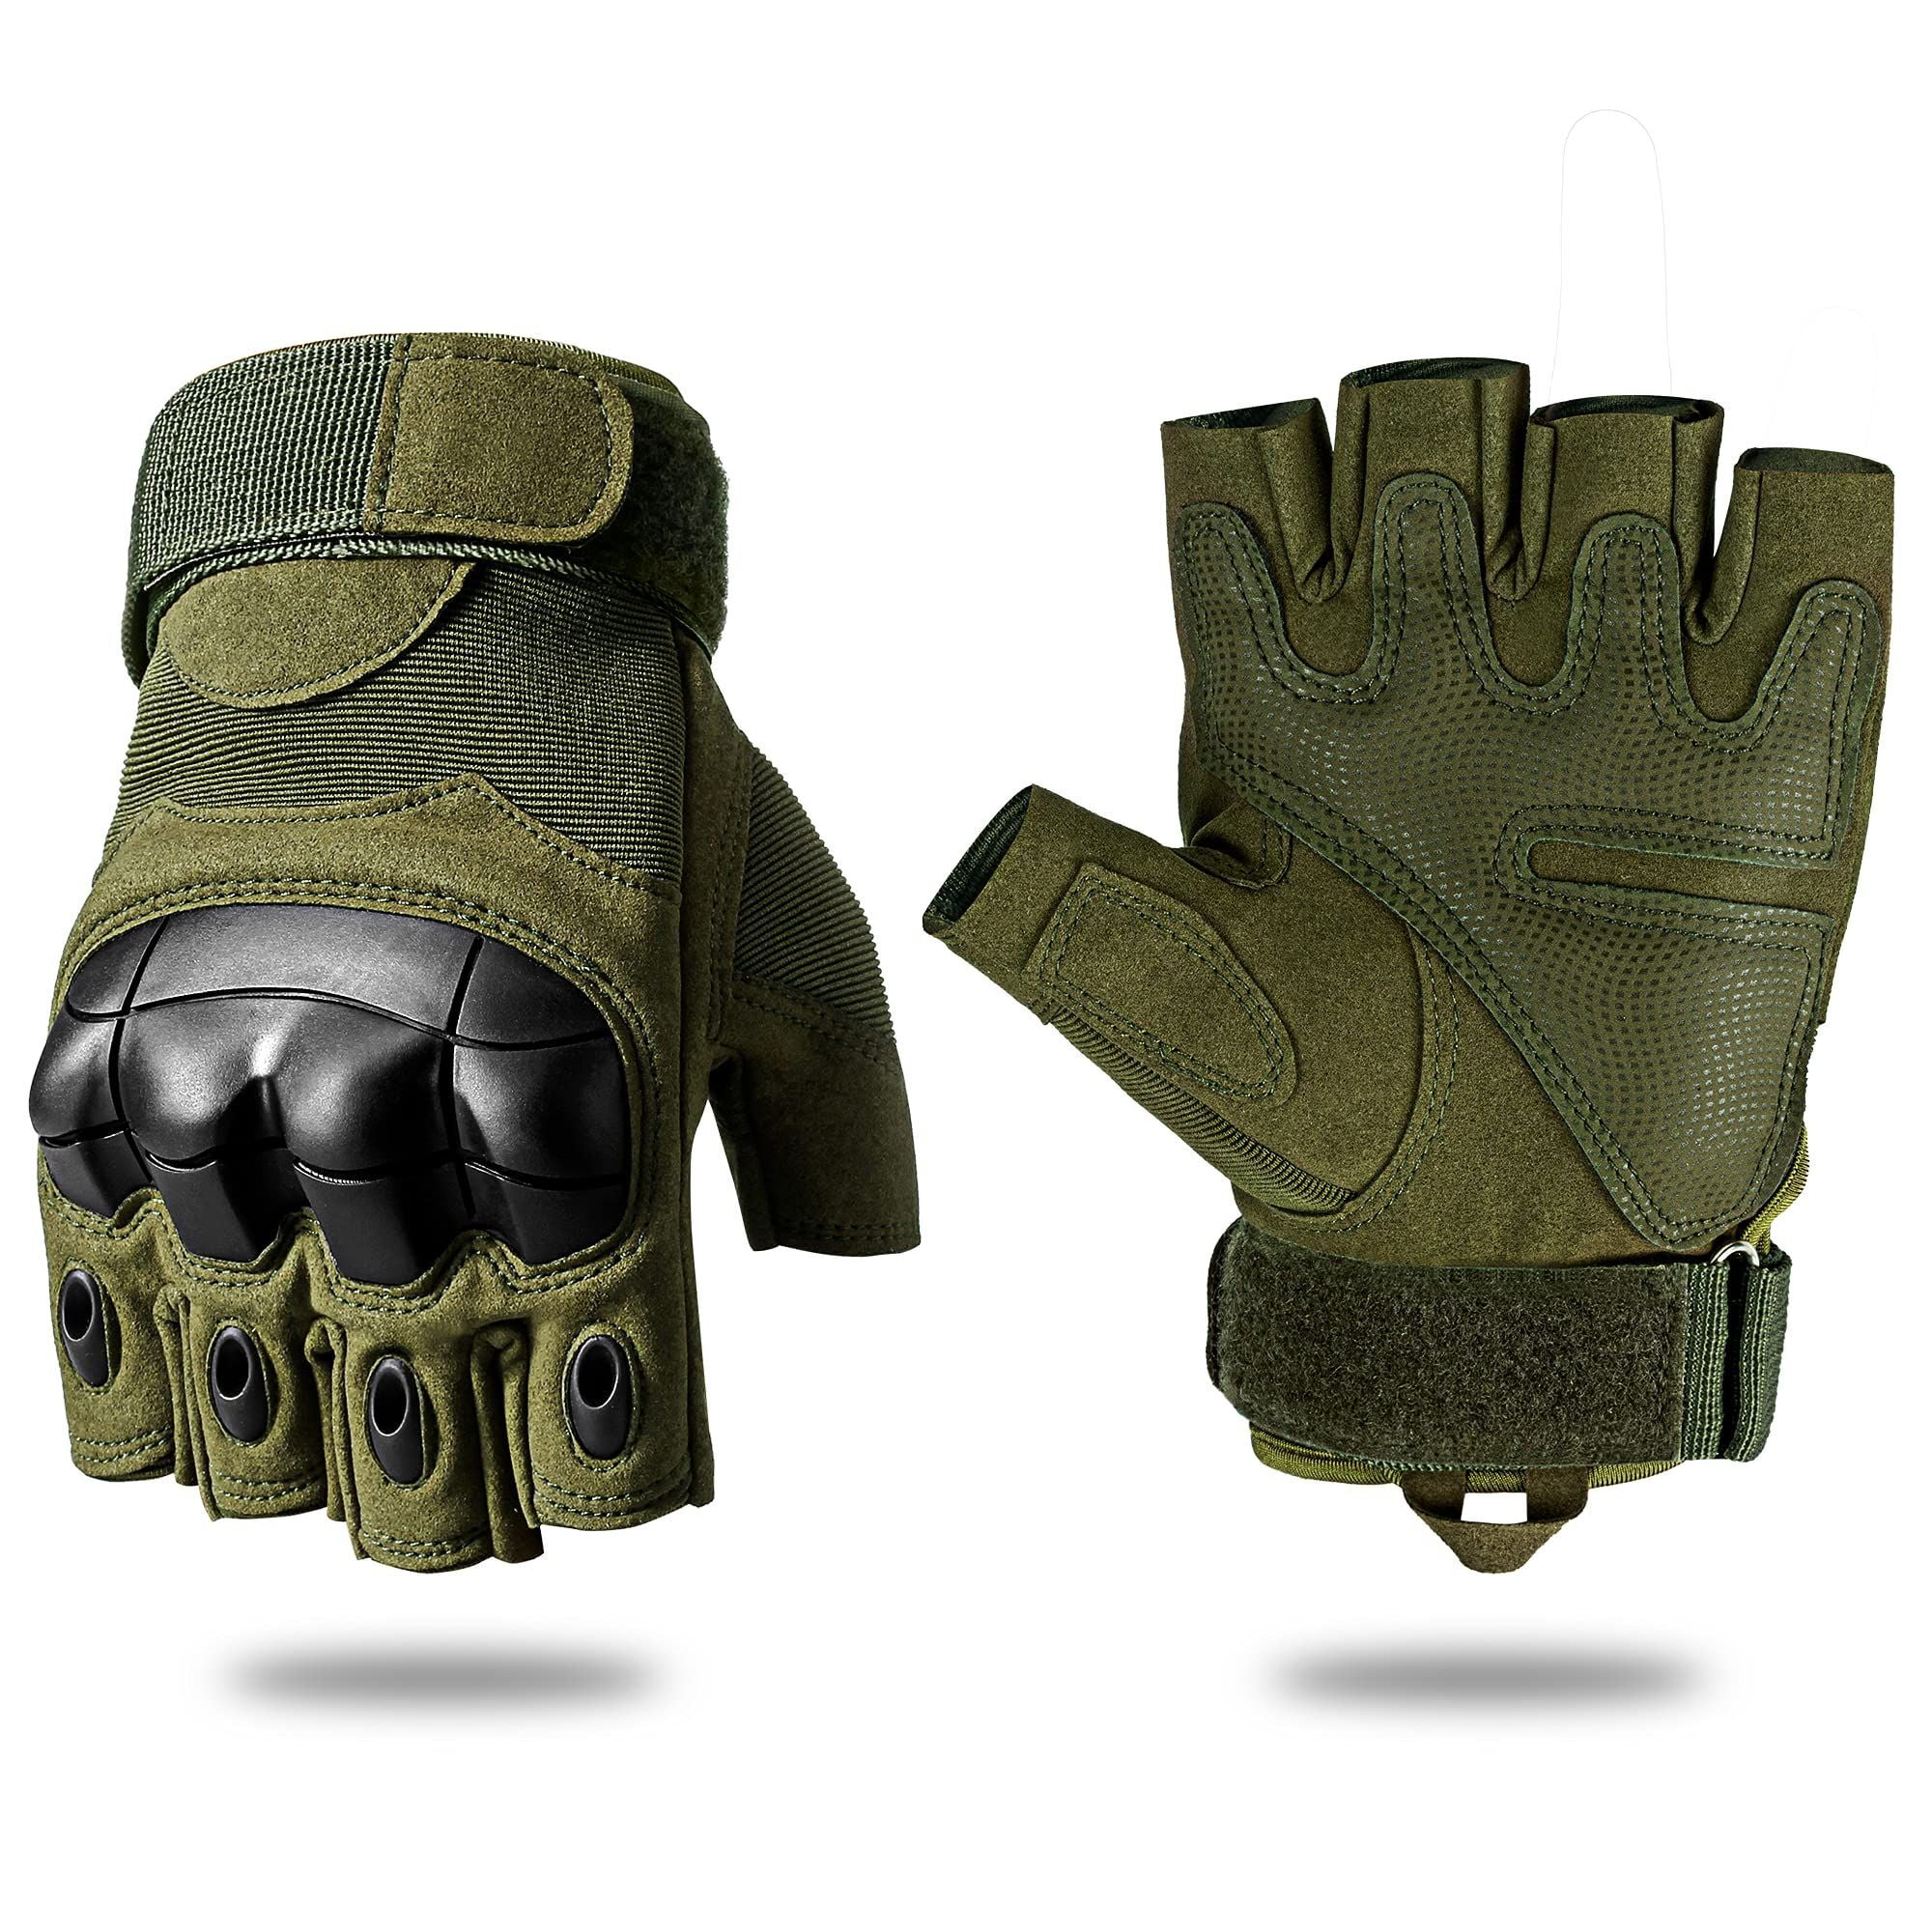 Hard Knuckle Half Finger Gloves Paintball Tactical Fingerless Motorcycle Cycling 